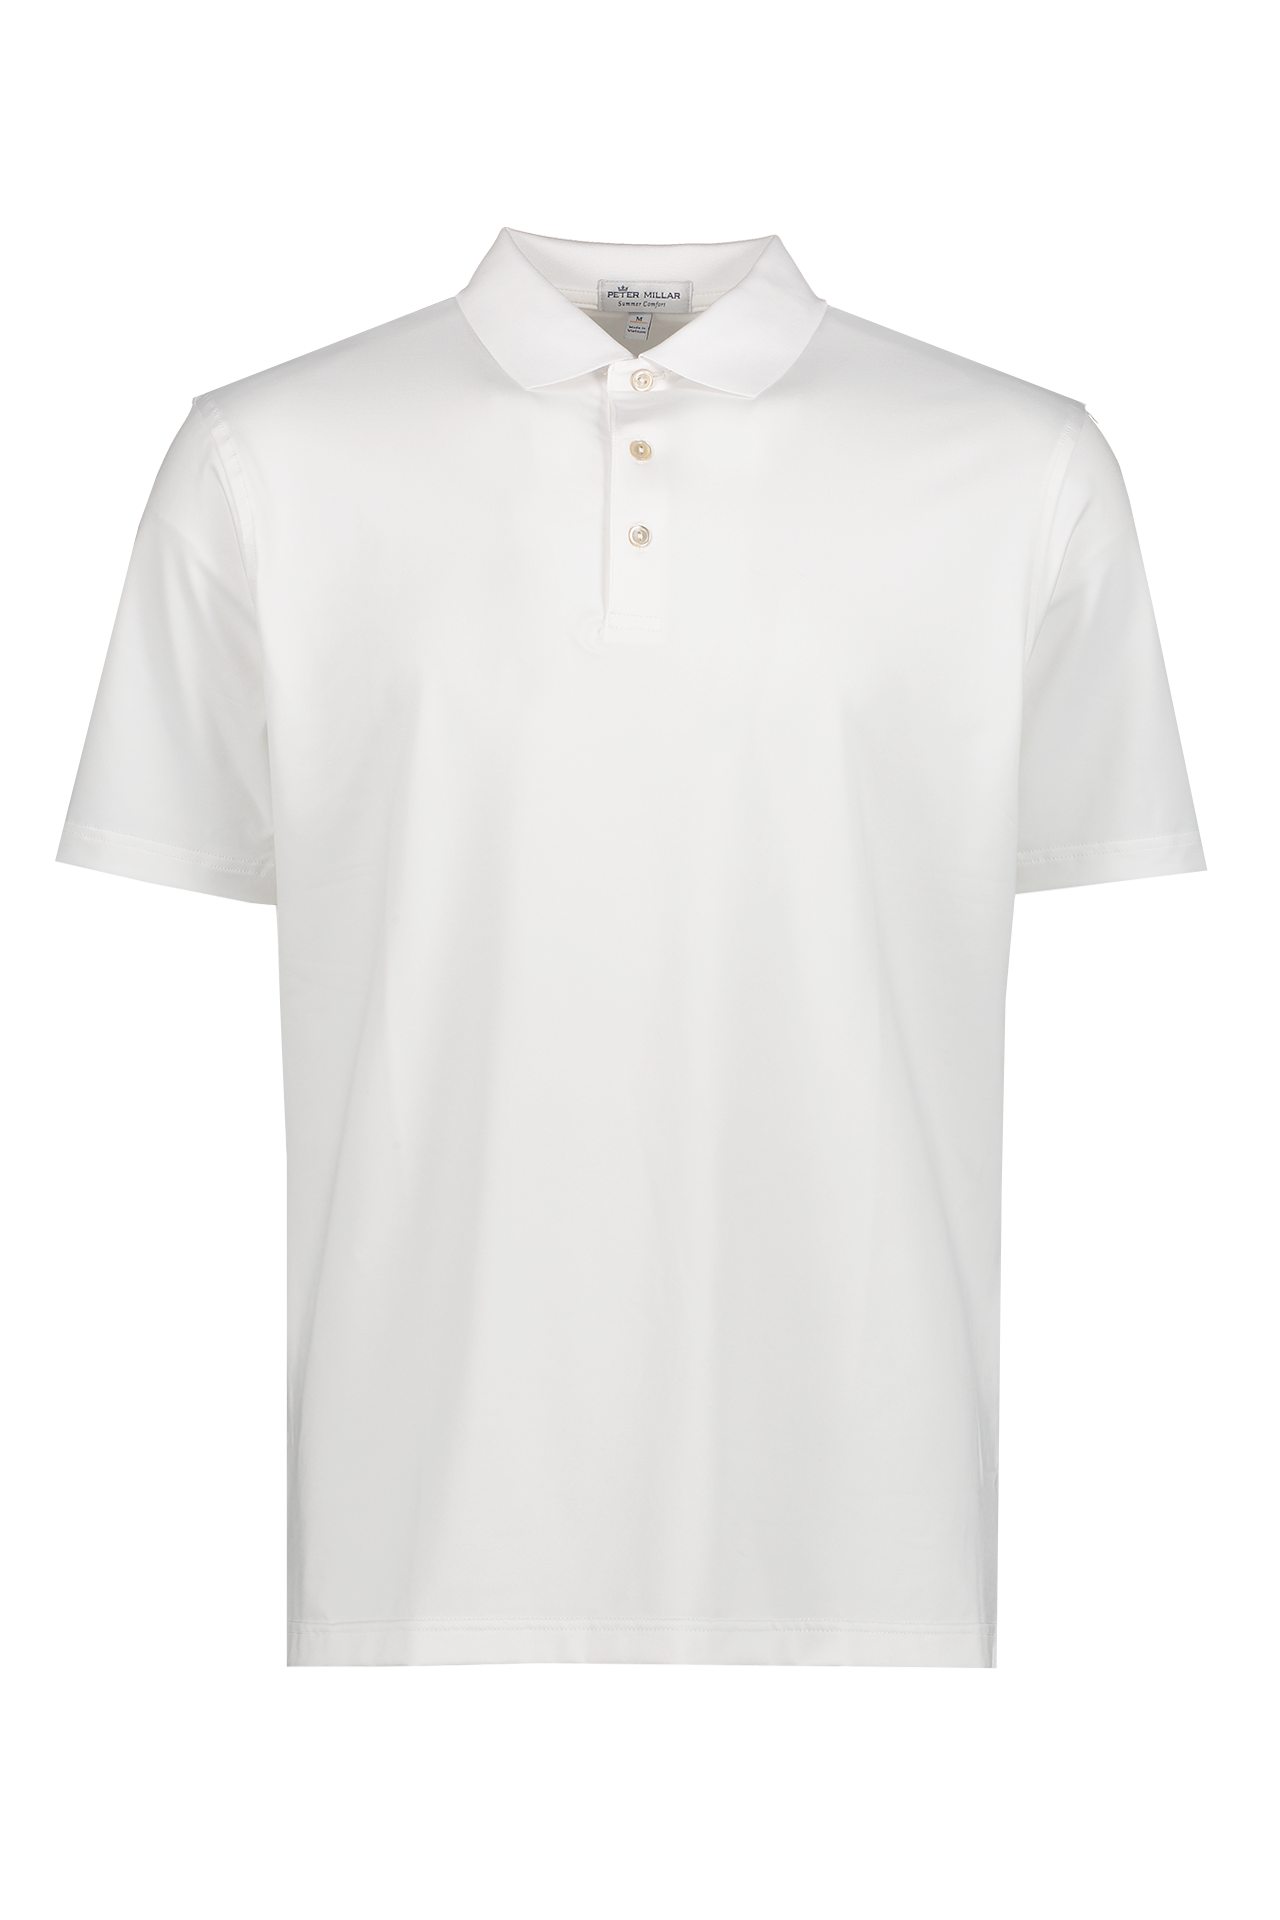 Peter Millar Solid Performance Jersey Polo in White - Mannequin Image  (6606330462323)